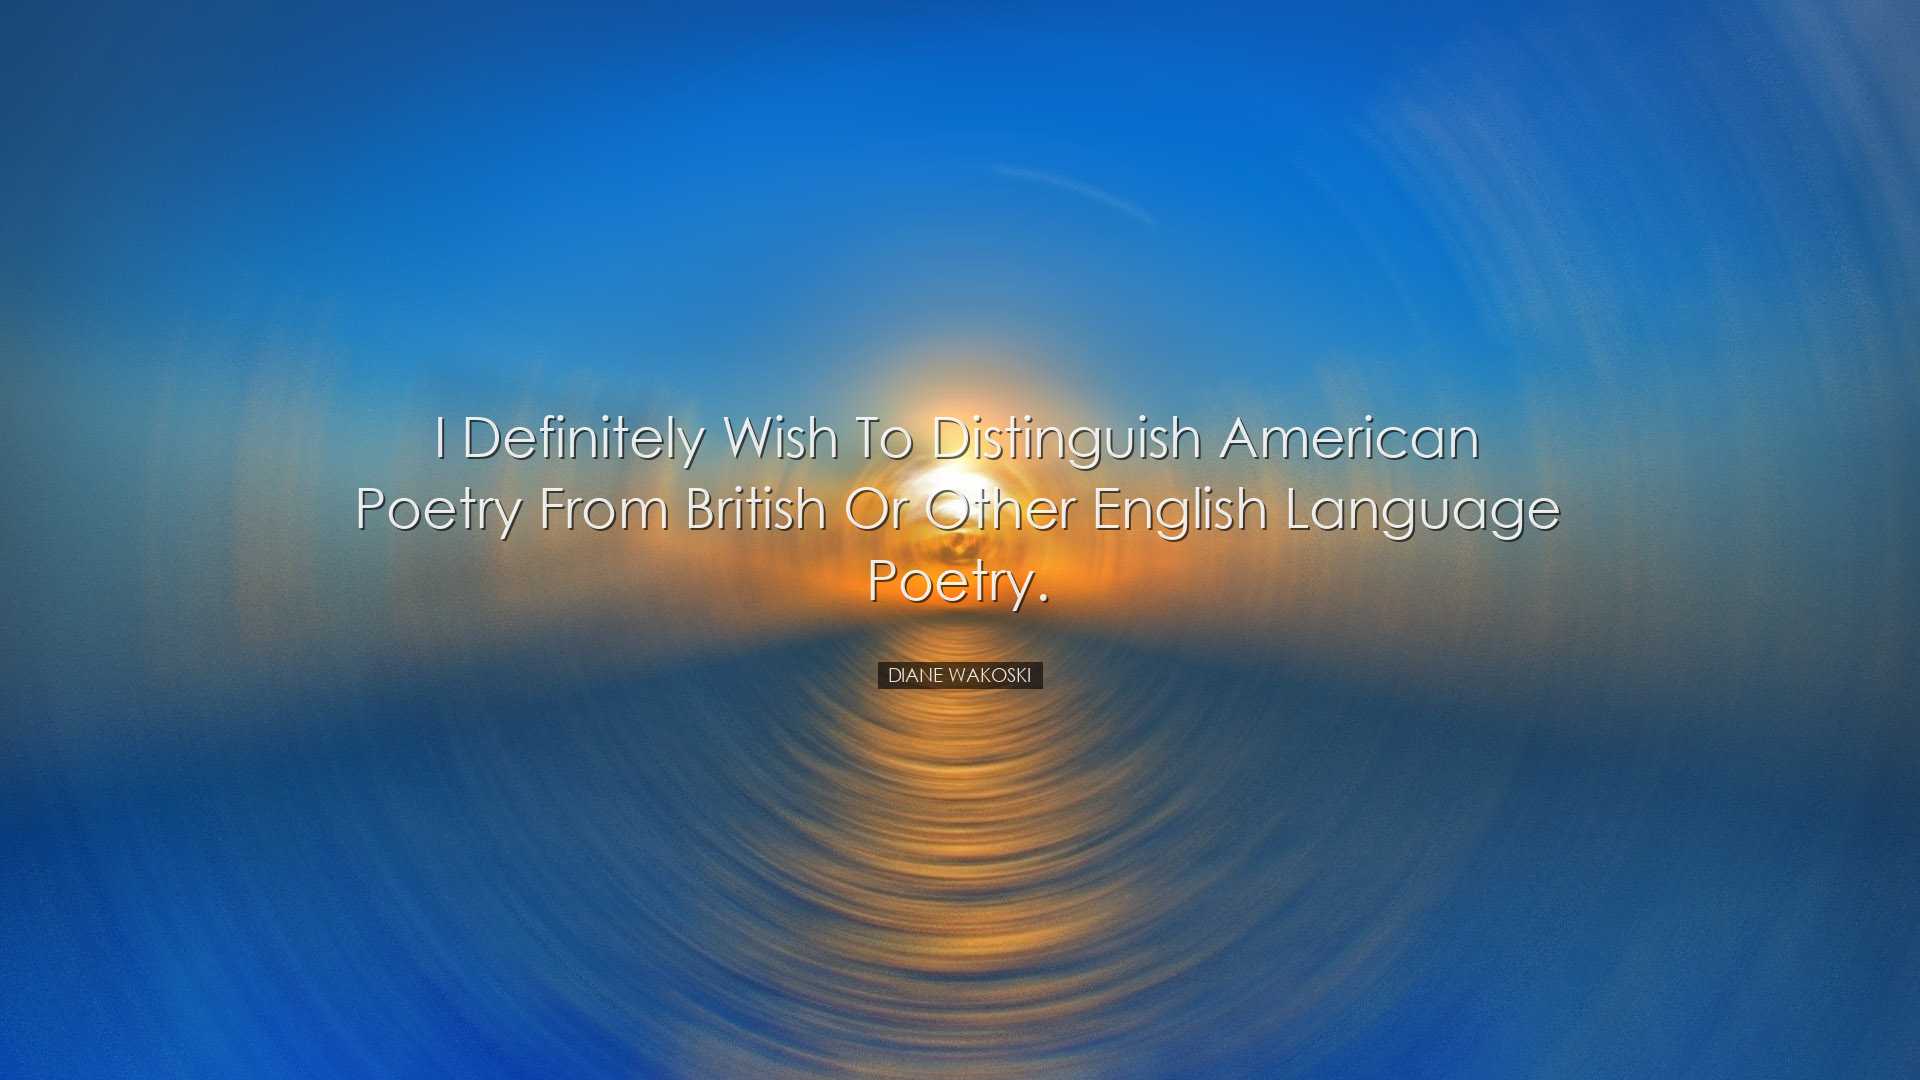 I definitely wish to distinguish American poetry from British or o